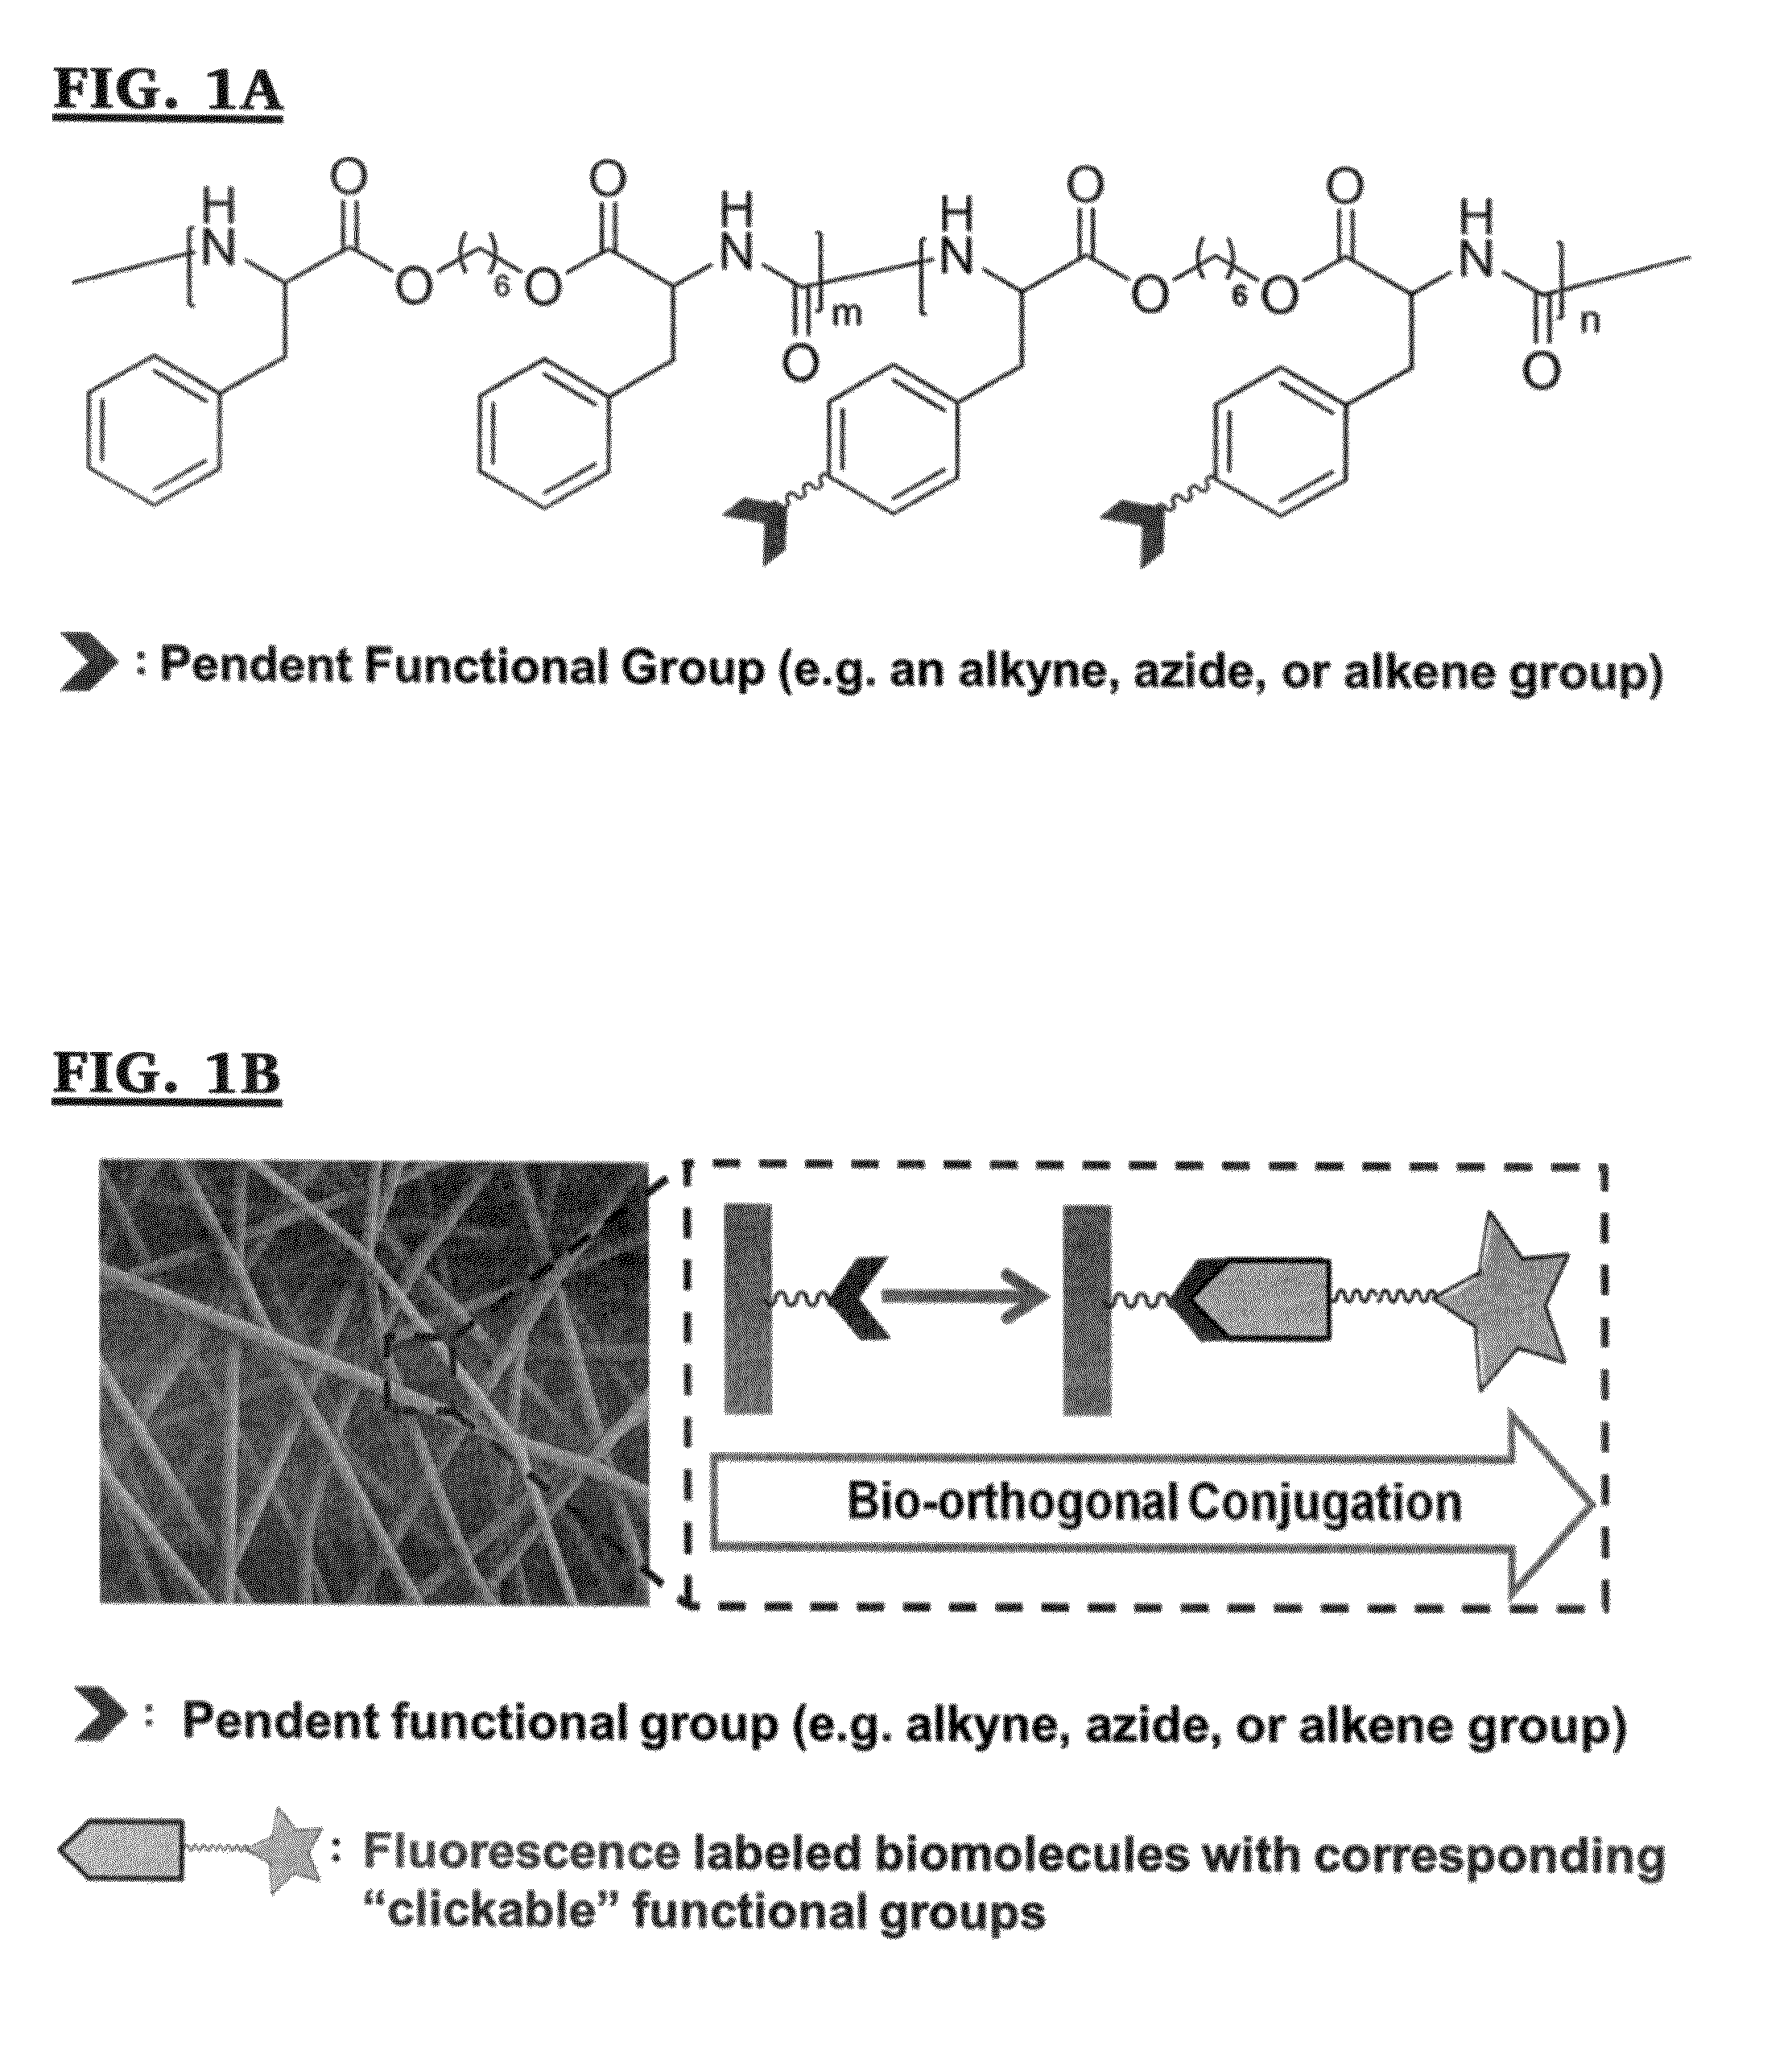 Methods for post-fabrication functionalization of poly(ester ureas)